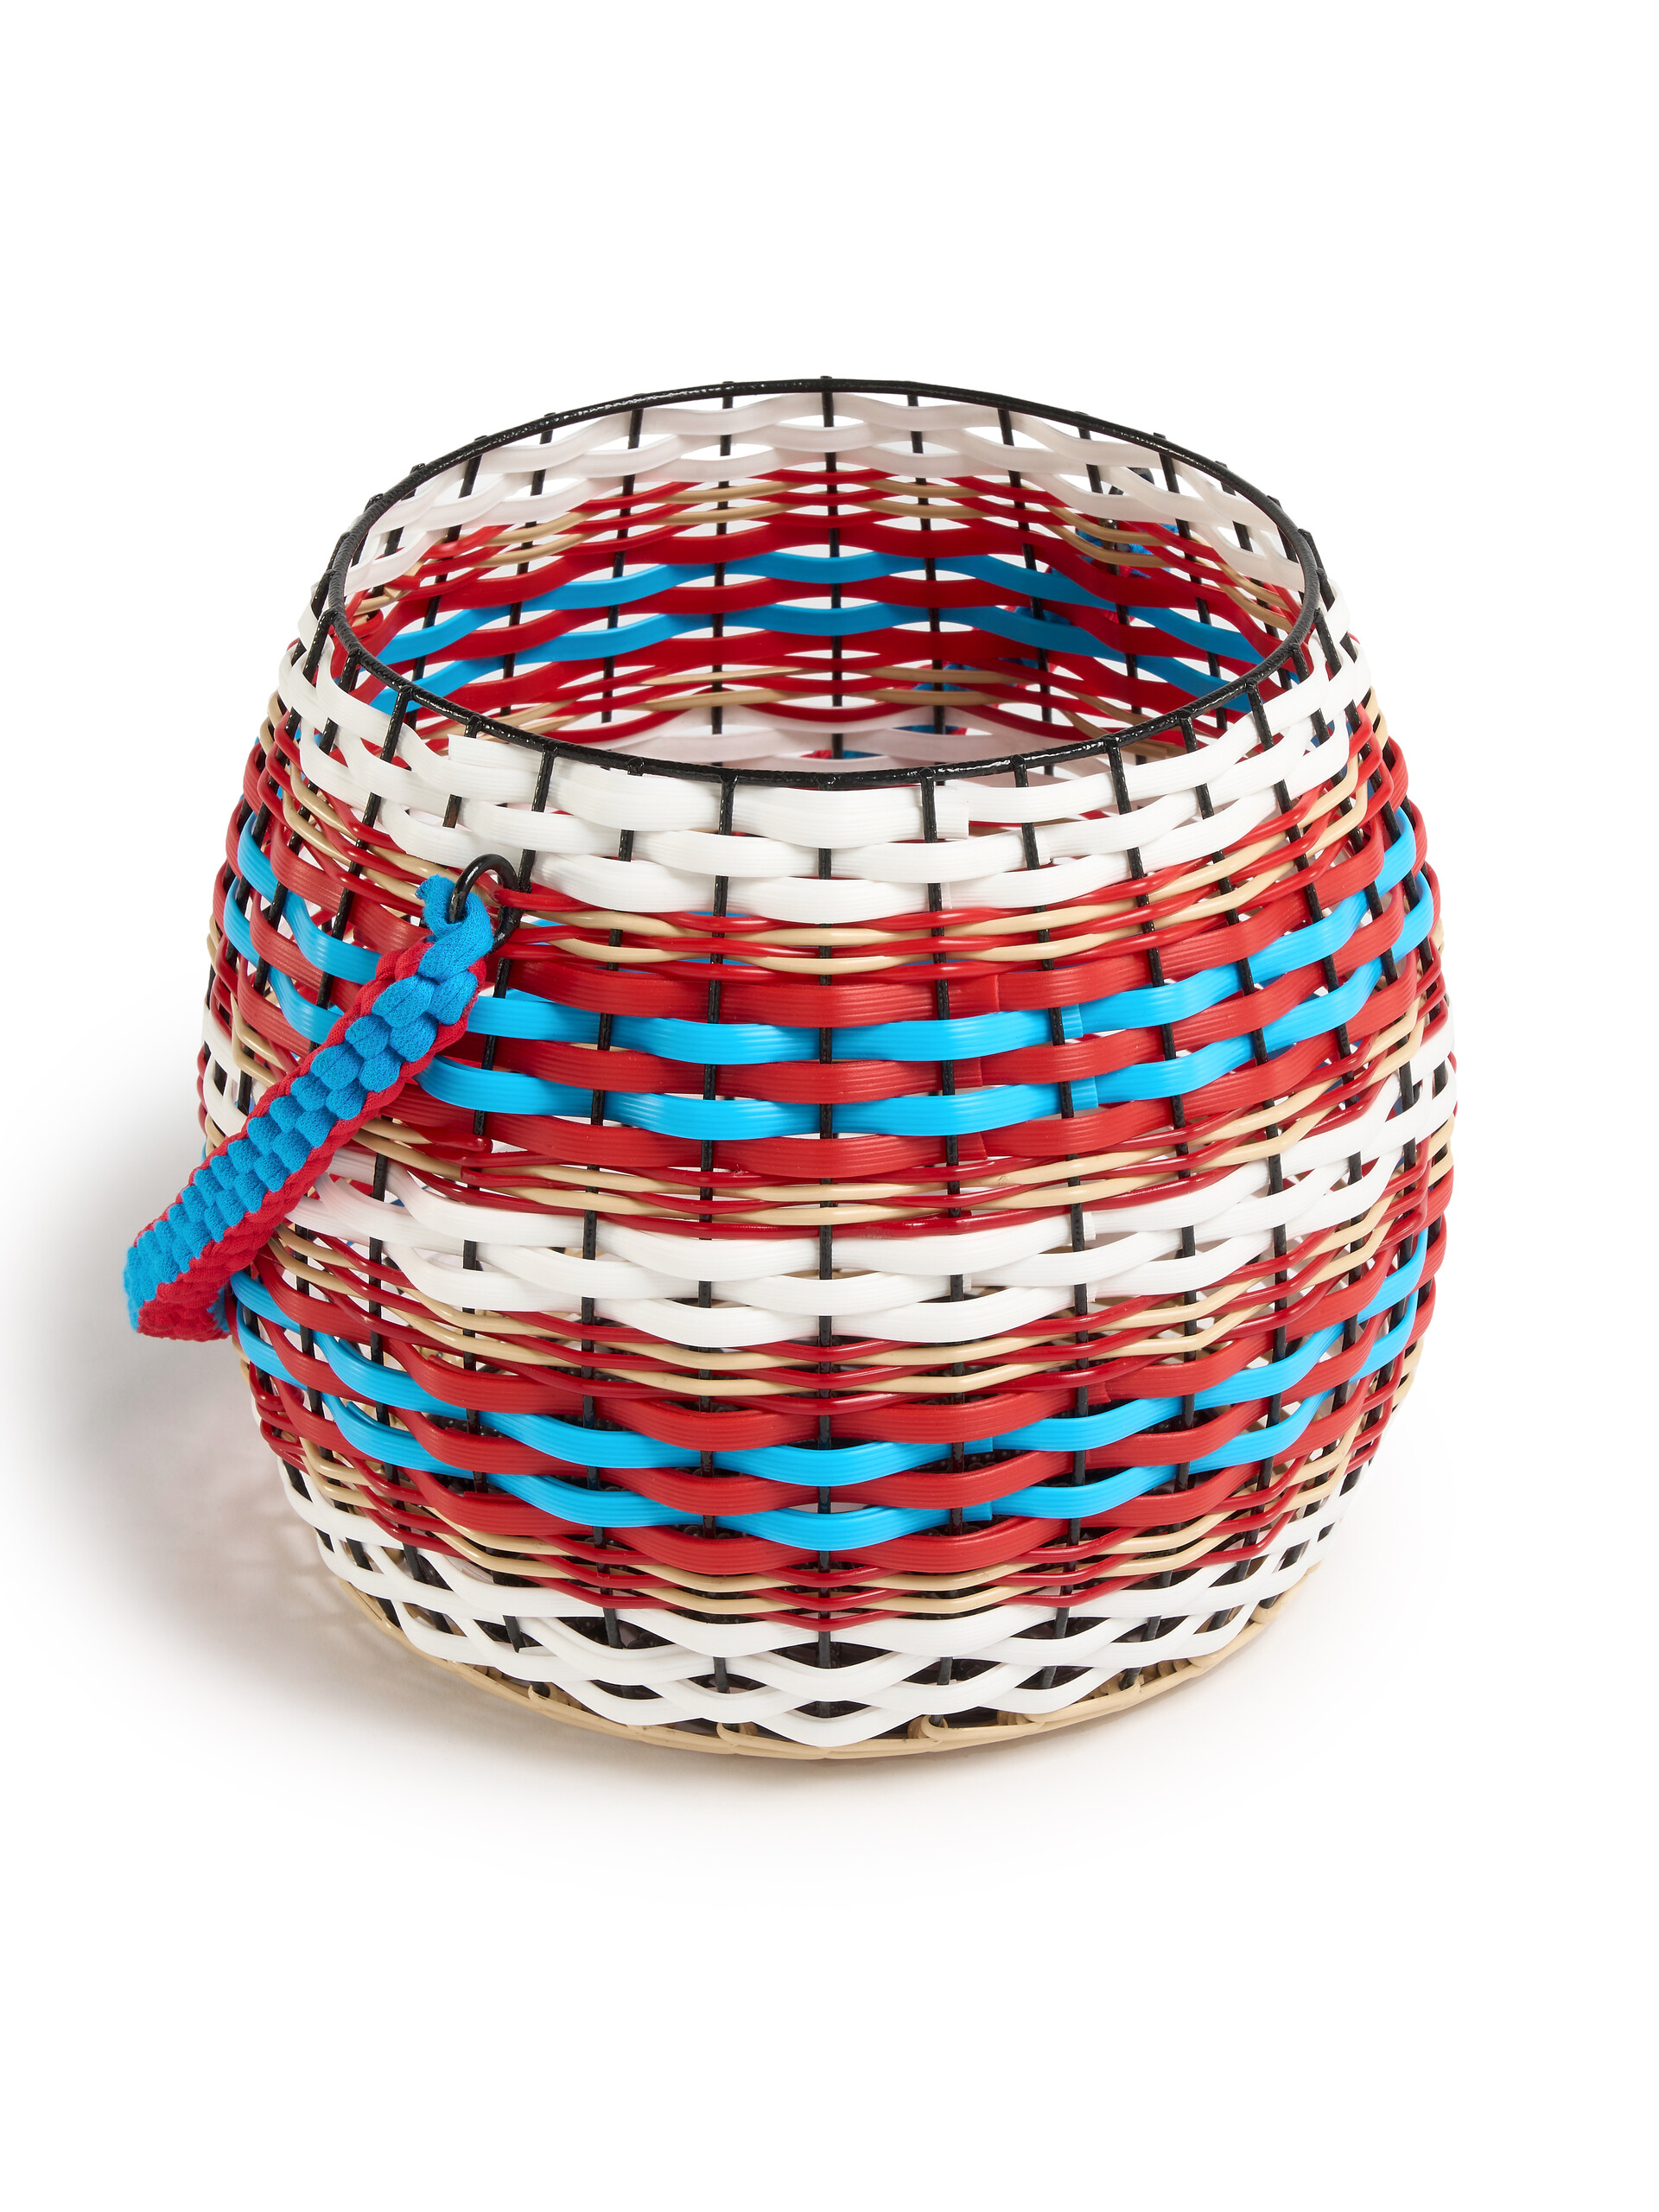 Red and white MARNI MARKET woven cable basket - Accessories - Image 3